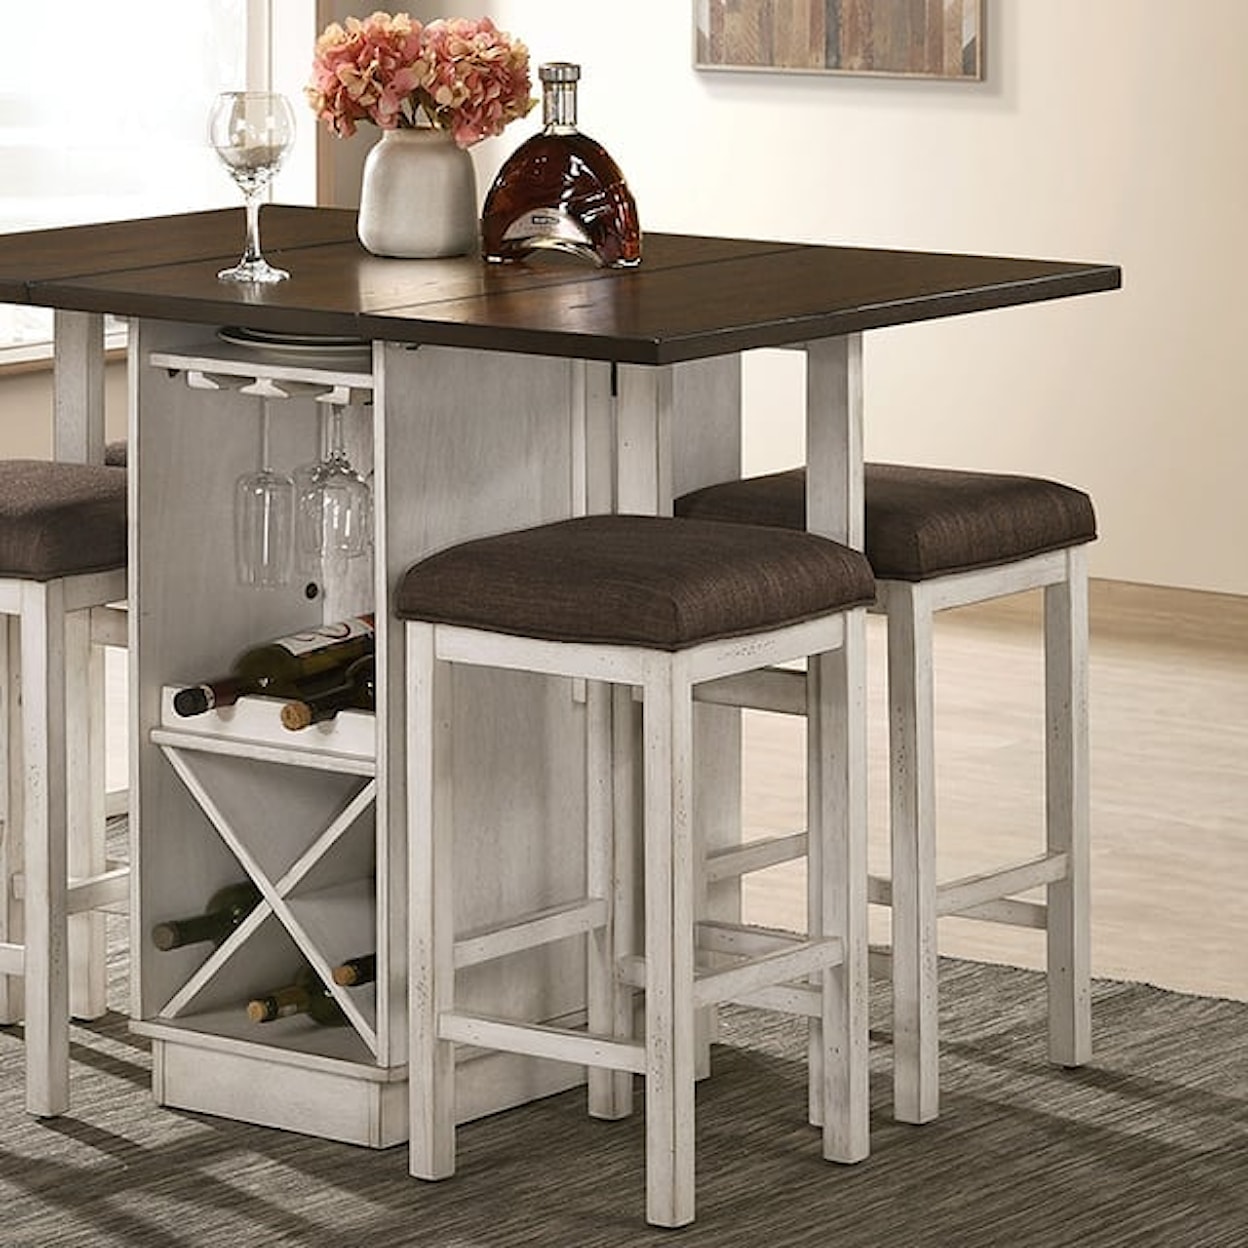 Furniture of America Bingham 5-Piece Counter Height Dining Set